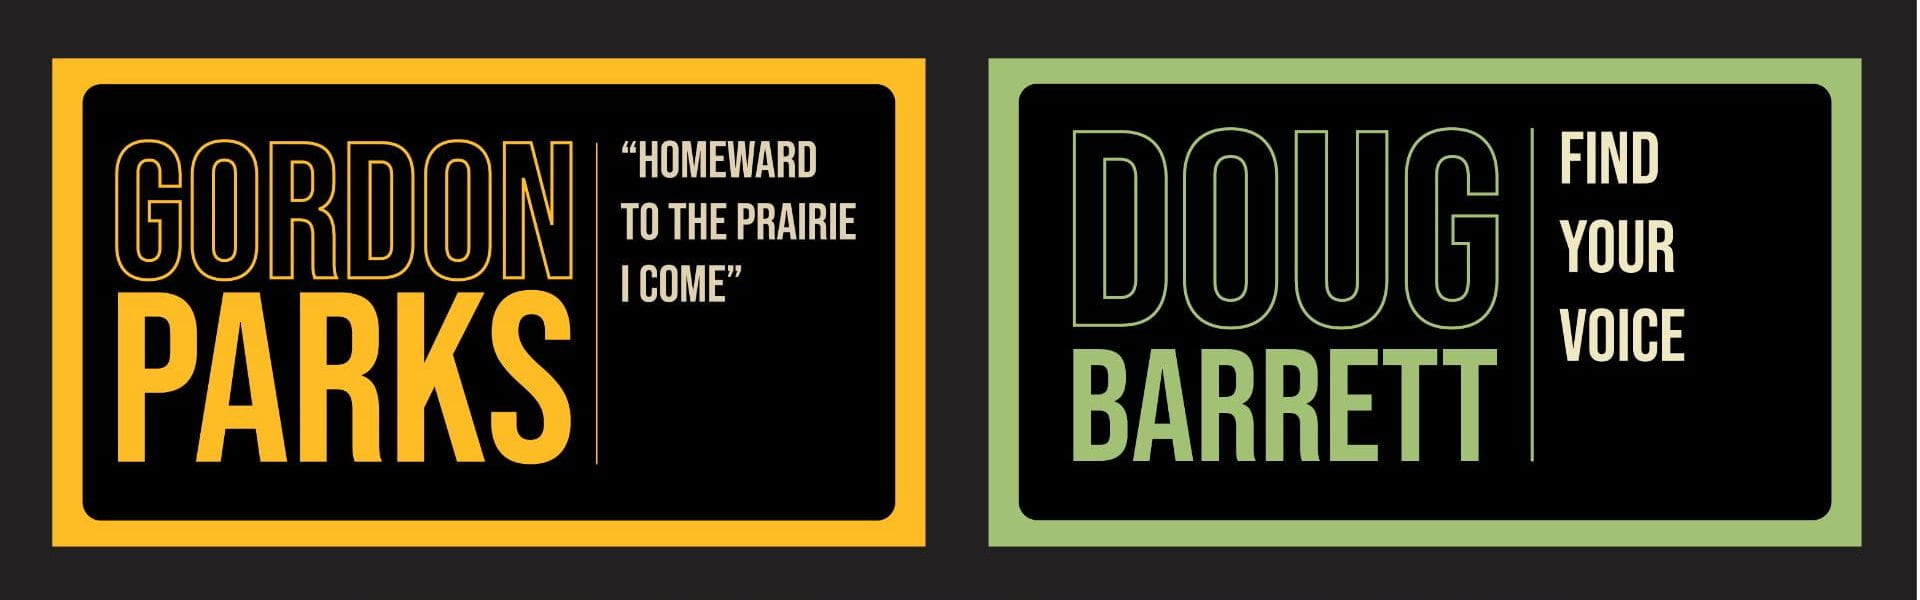 "Gordon Parks: 'Homeward to the Prairie I Come" and "Doug Barrett: Find Your Voice" exhibition titles